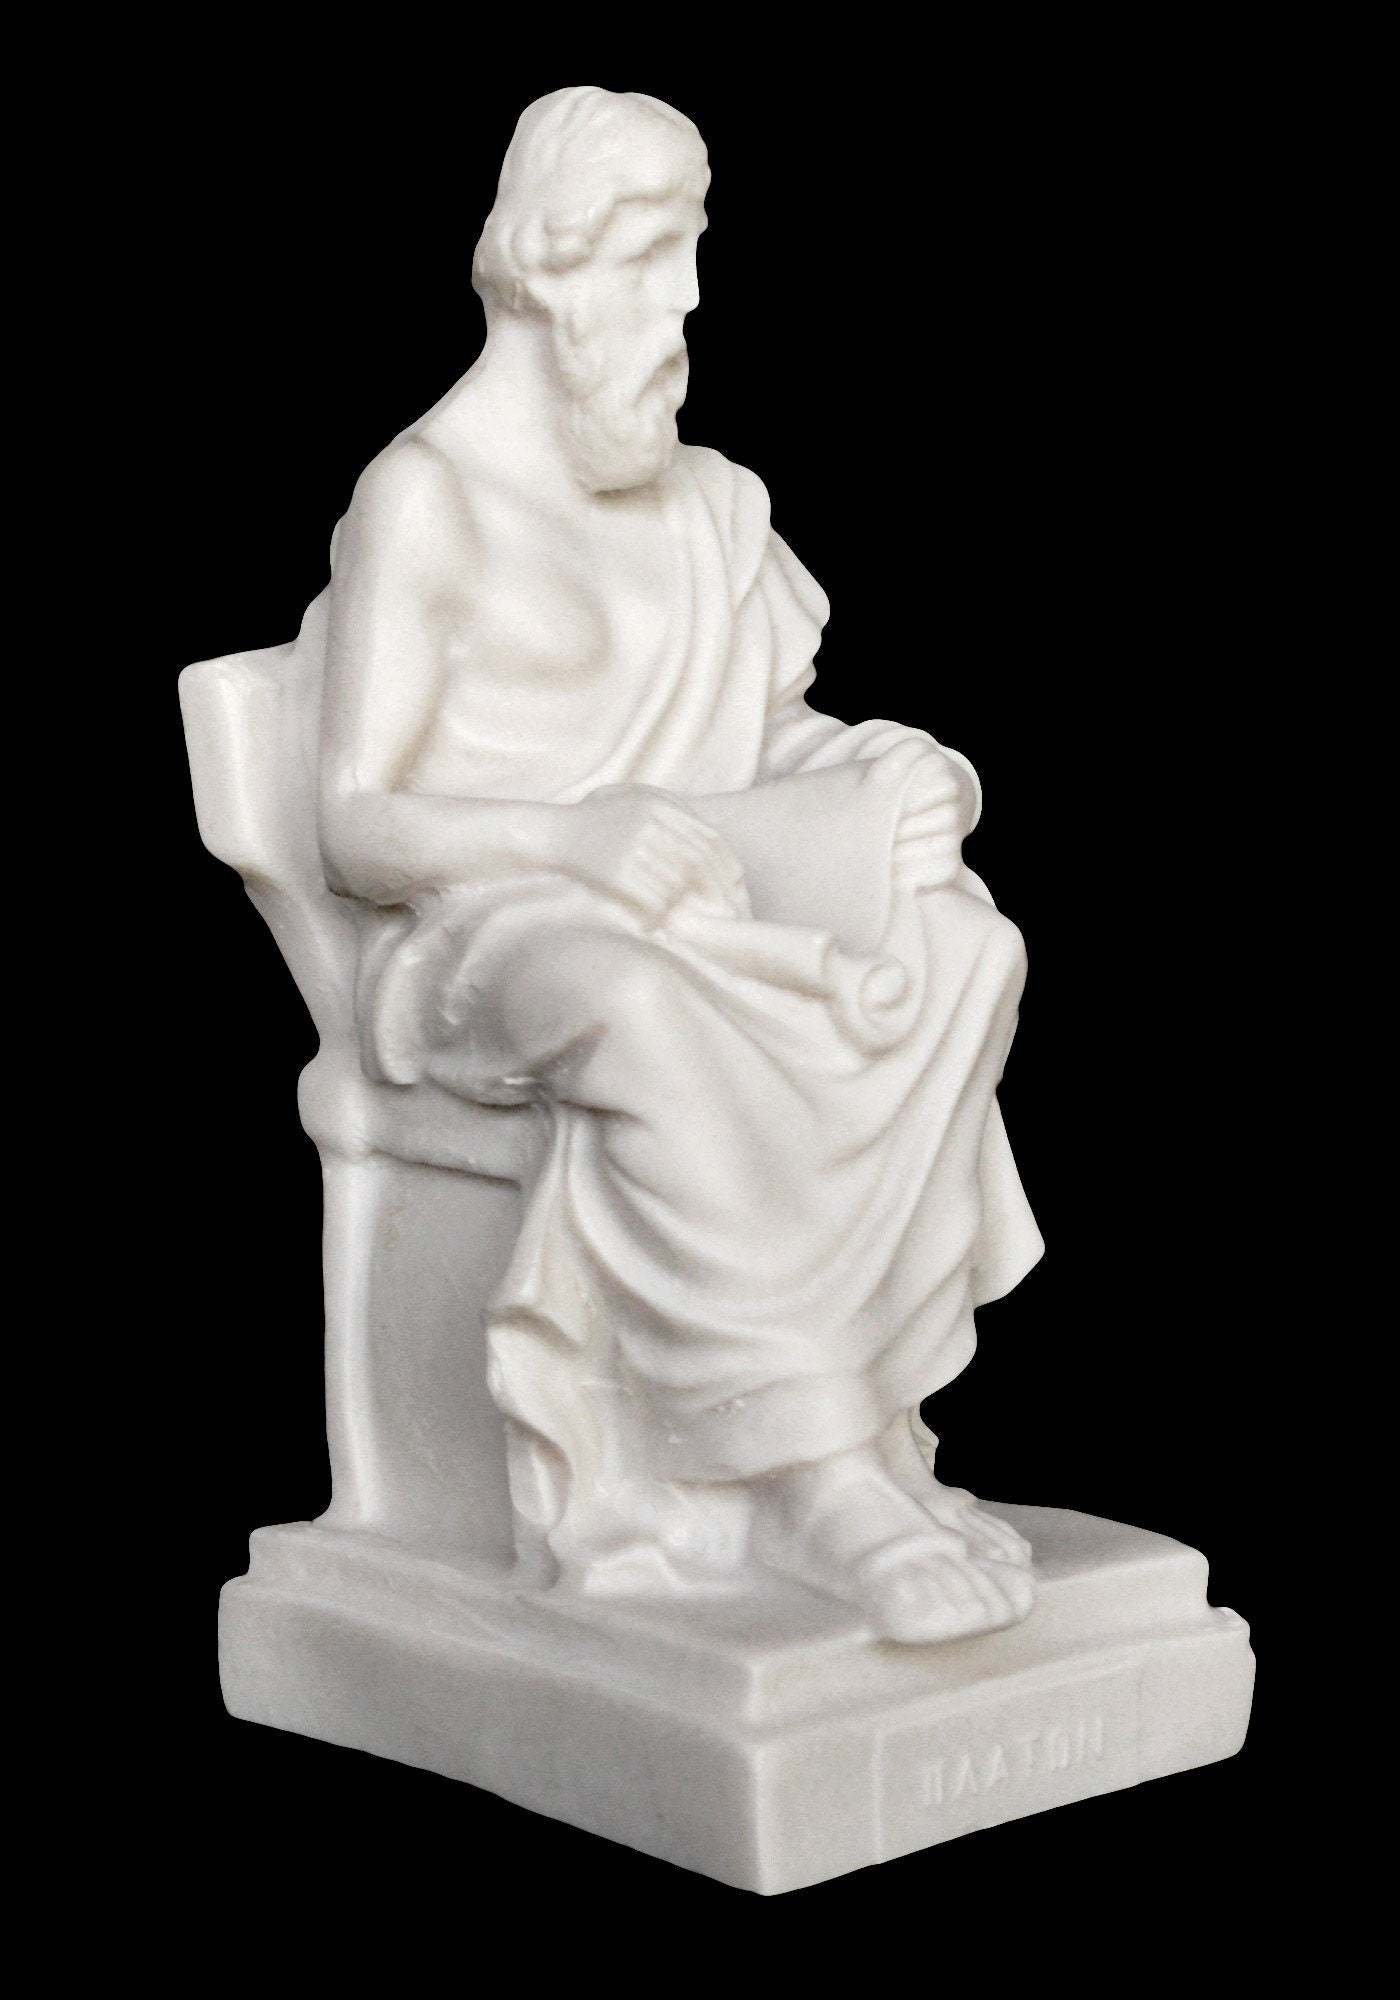 Plato - Ancient Greek Philosopher - 428-348 BC - Student of Socrates, Teacher of Aristotle - Founder of the Academy - Alabaster Sculpture